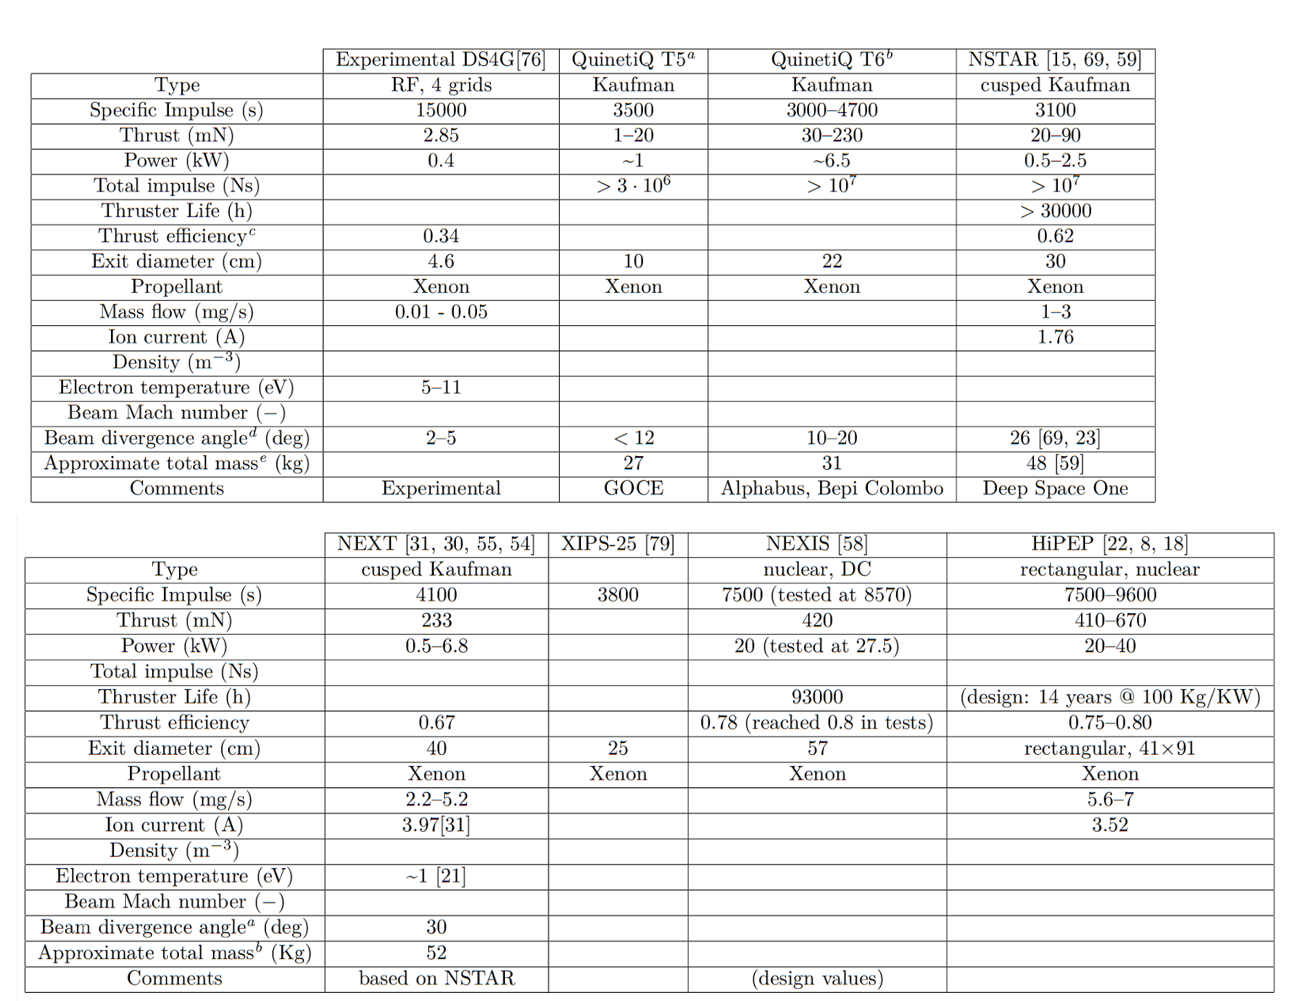 Specifications of various ion engines